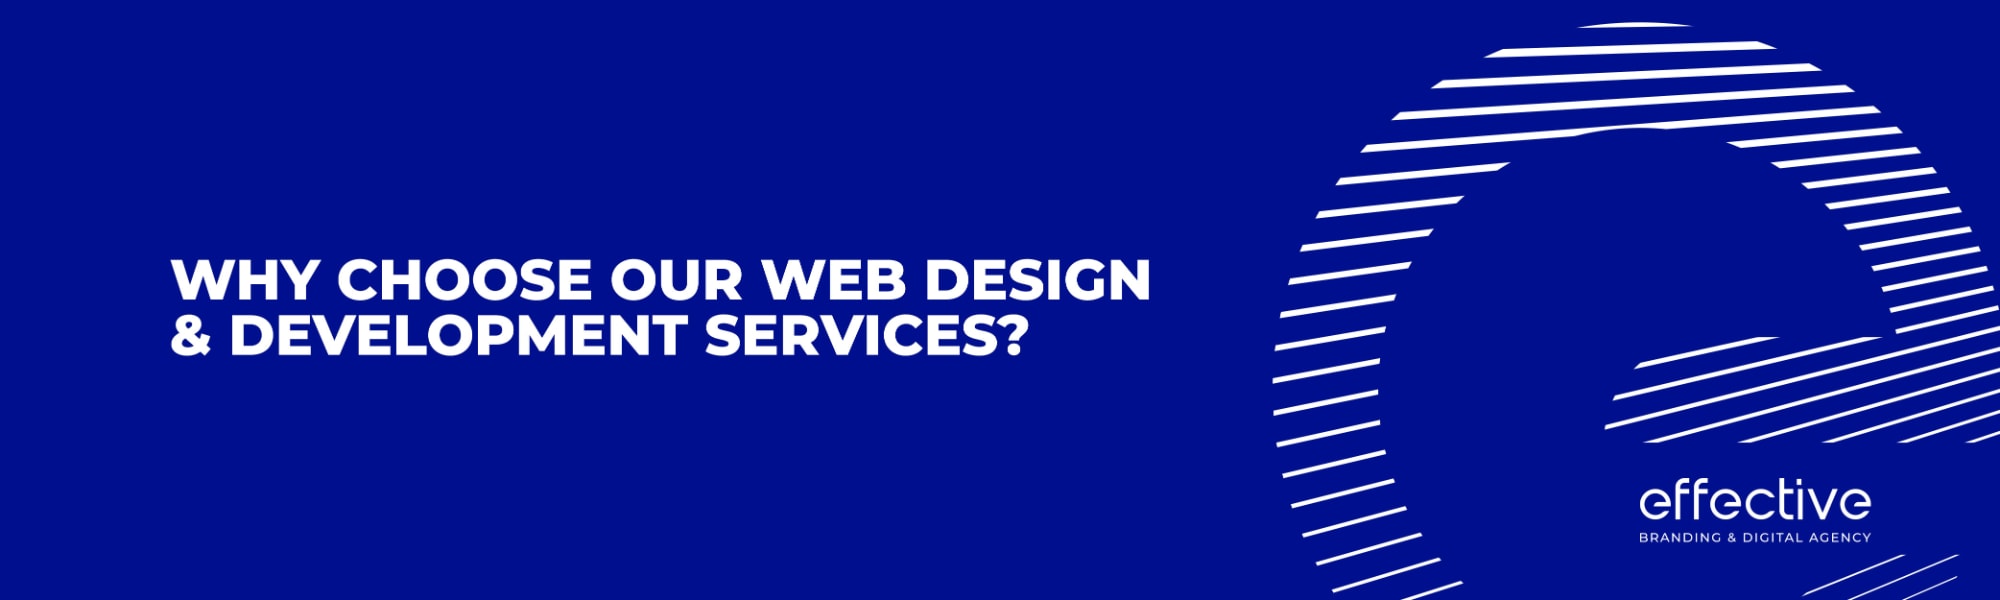 Why Choose Our Web Design and Development Services